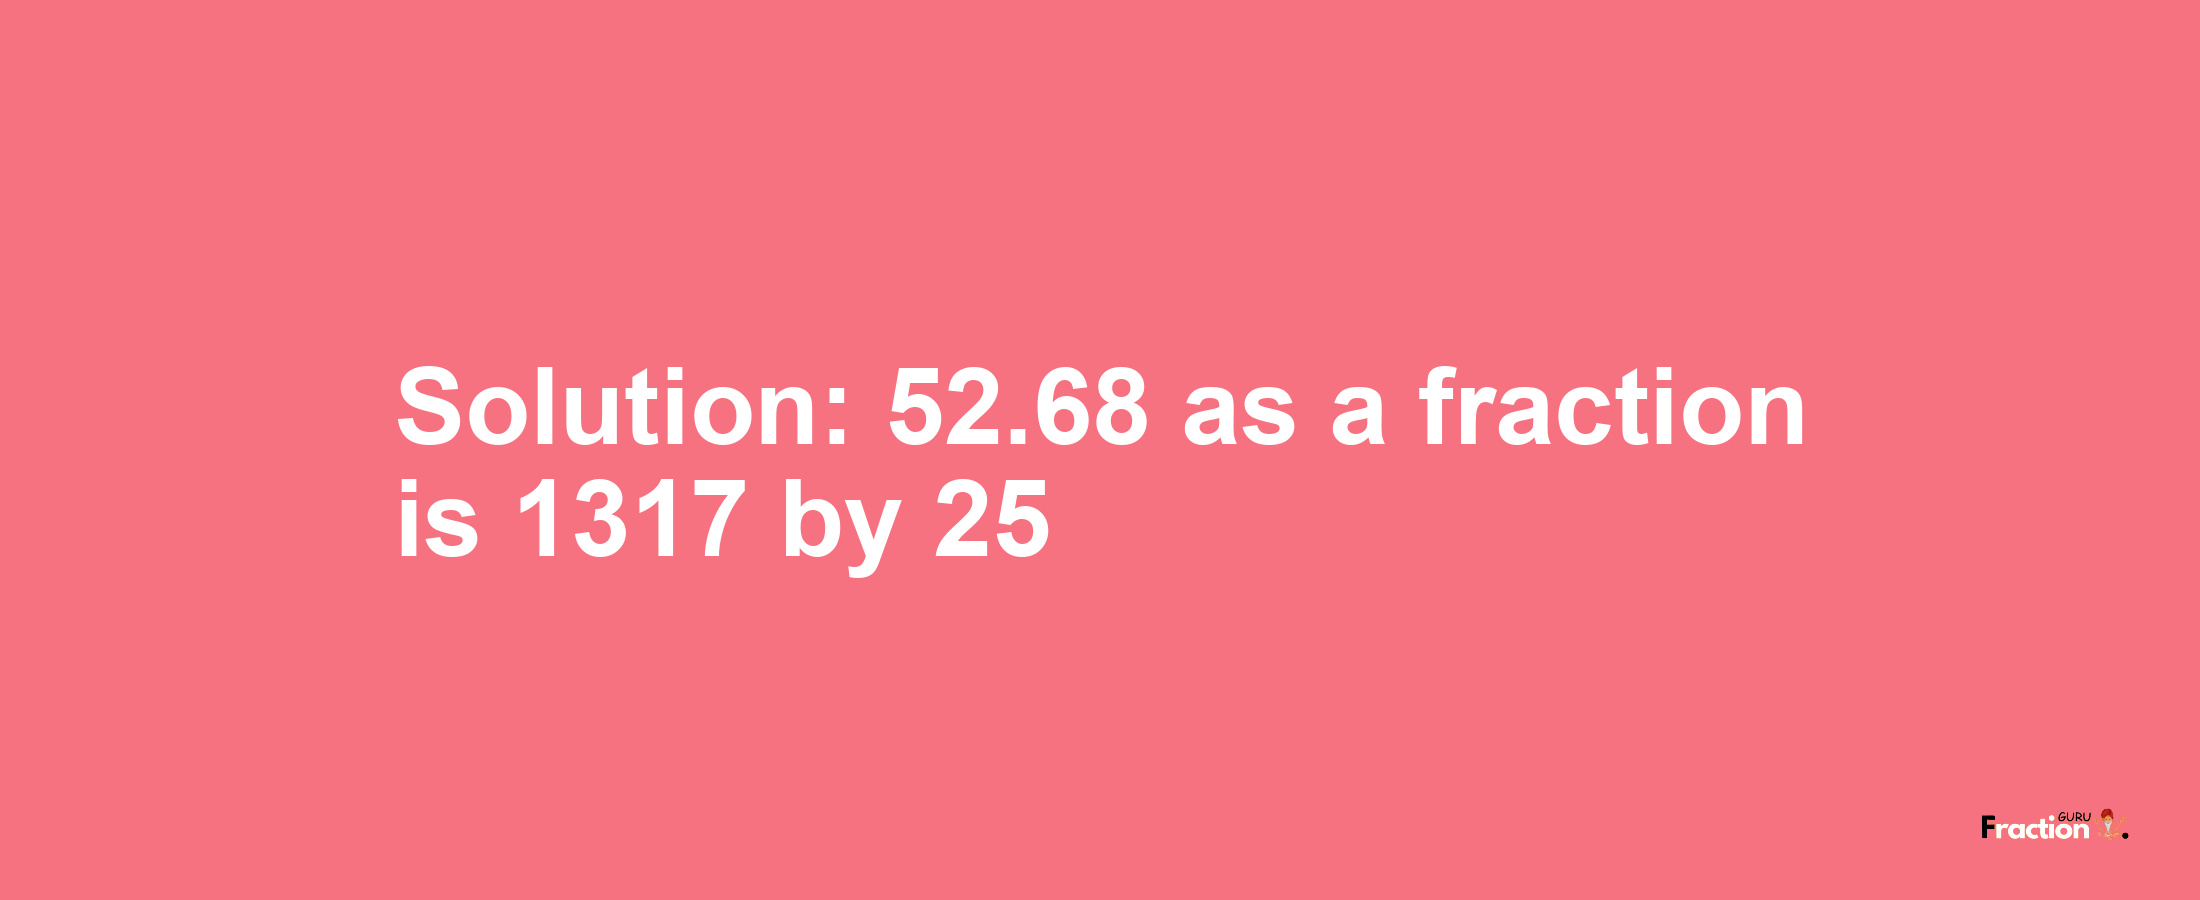 Solution:52.68 as a fraction is 1317/25